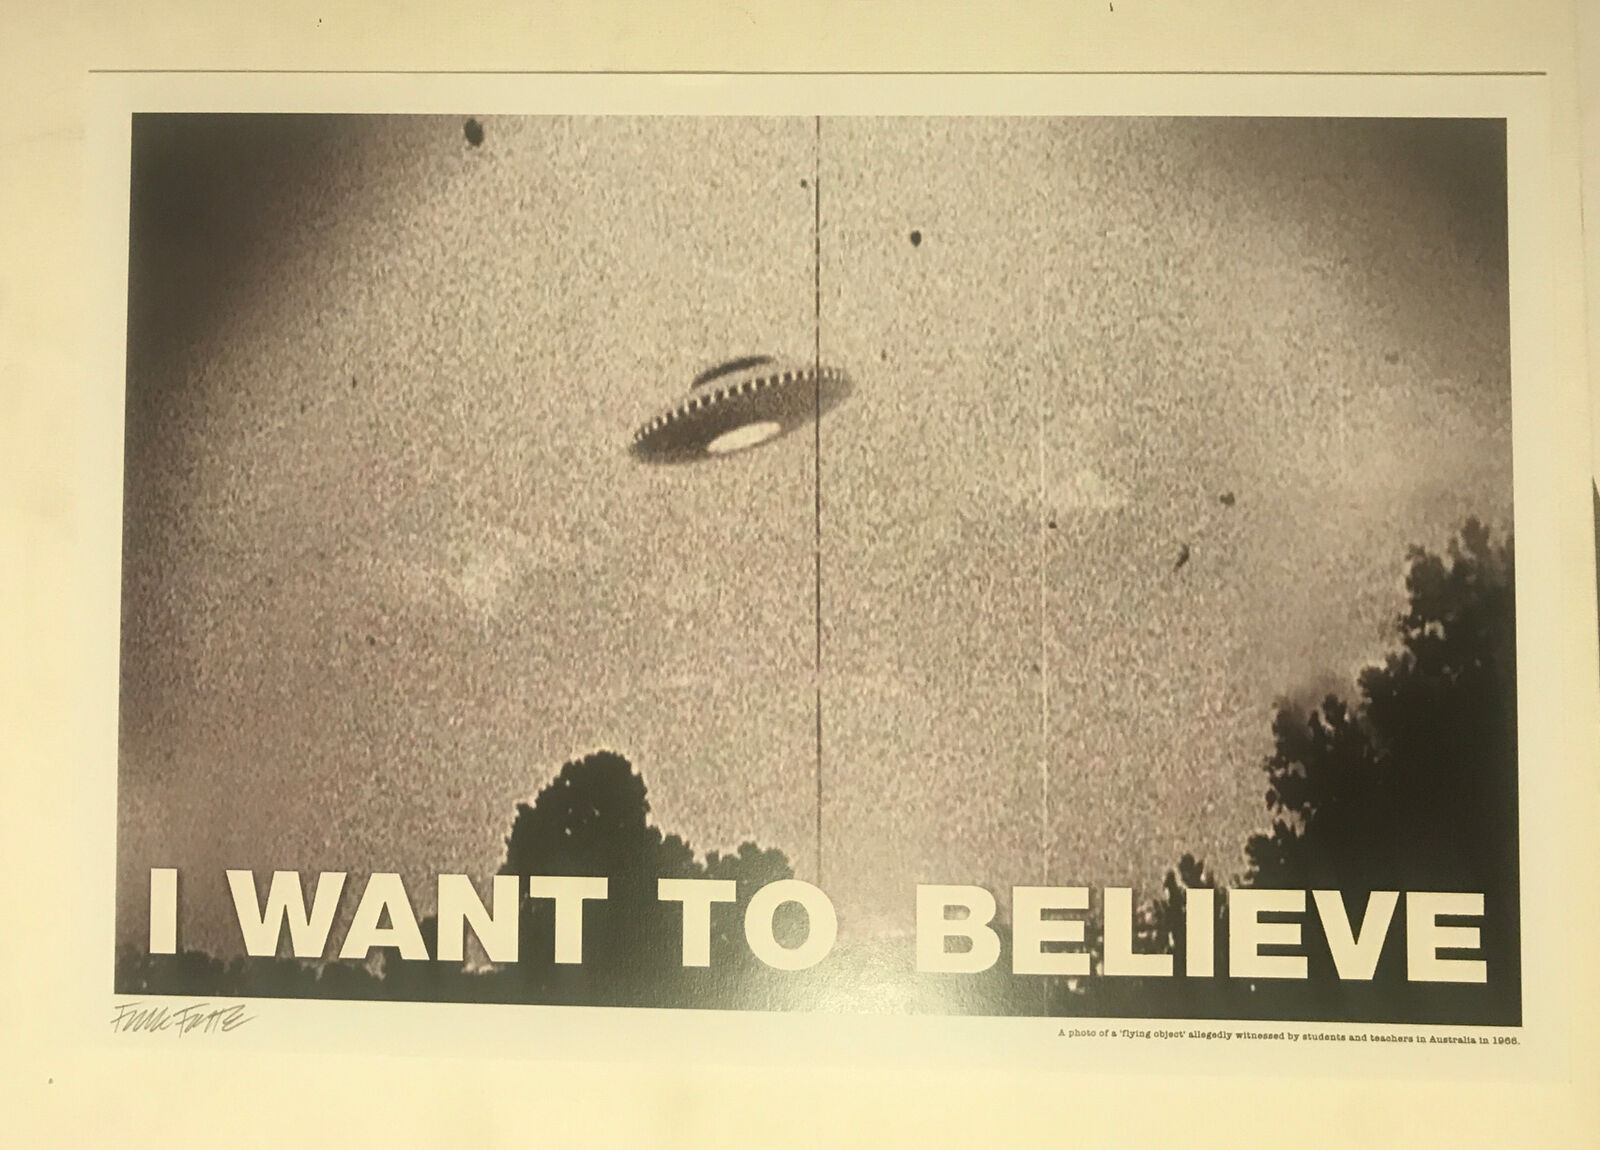 UFOs EXIST Flying Saucer X-Files Conspiracy Poster/Print signed by artist Frank 